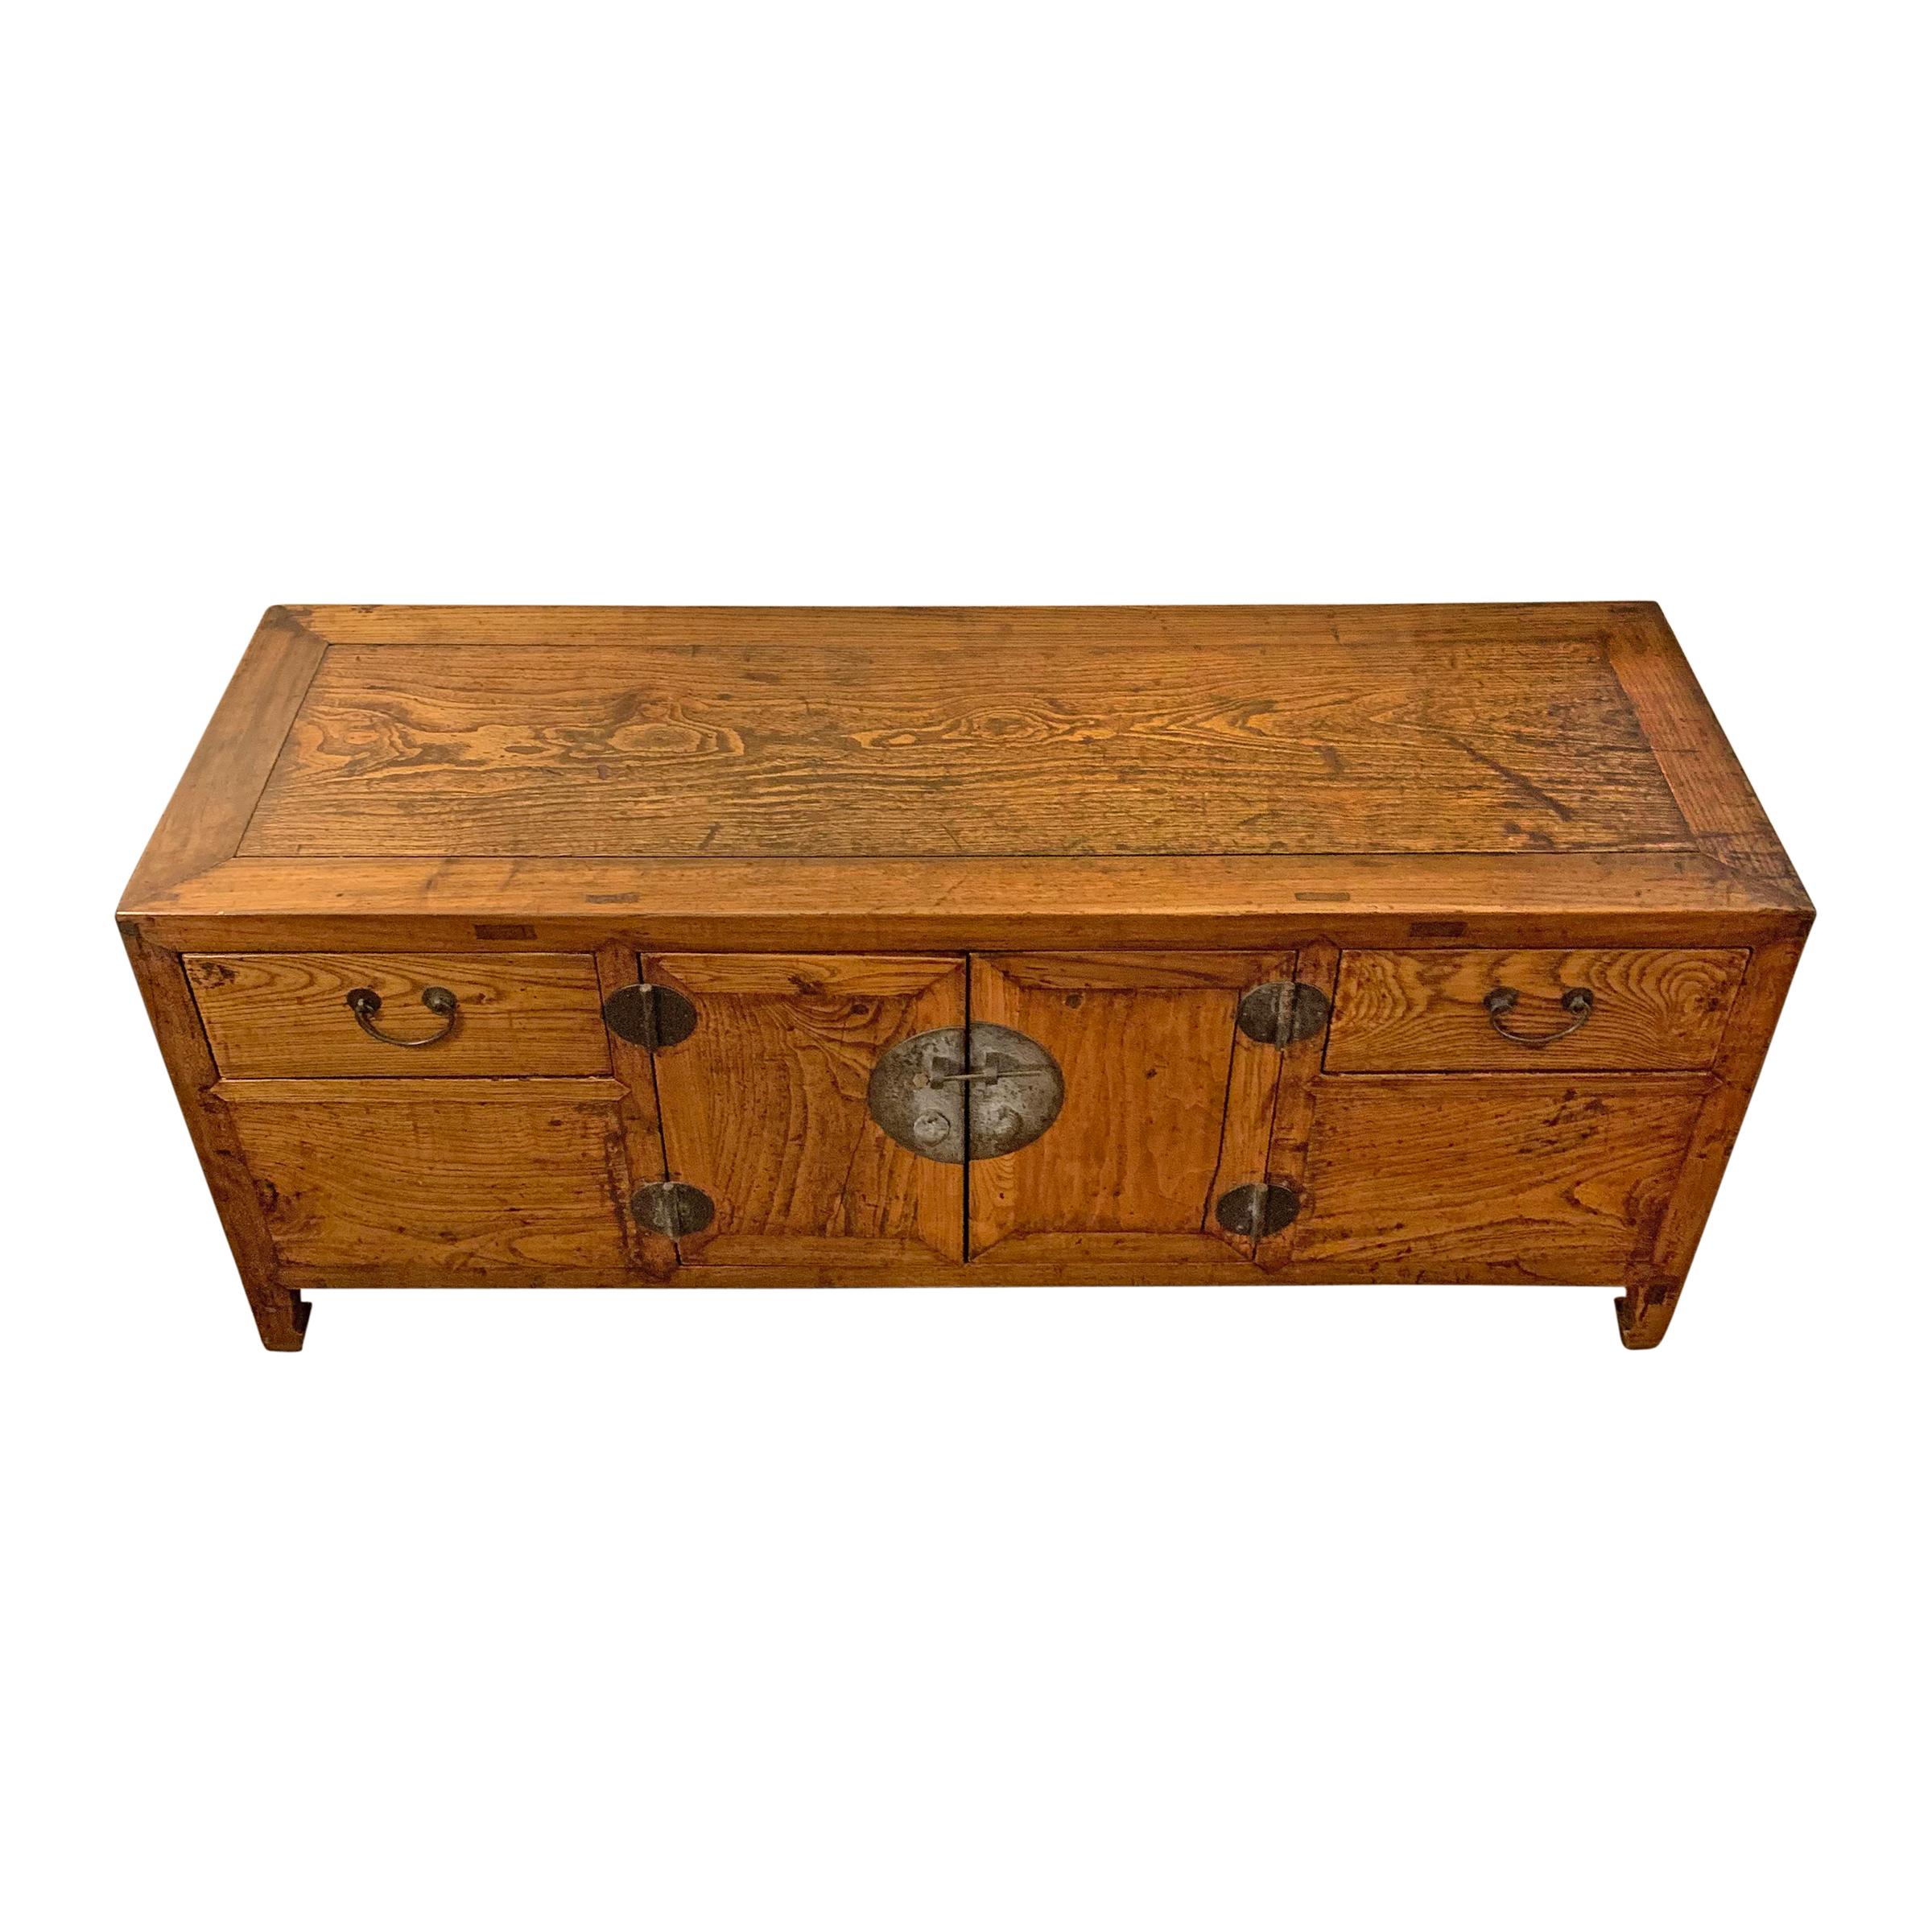 A wonderful late 19th century Chinese elm kang (low) chest with two doors and two drawers, and beautifully patinated bronze hardware.